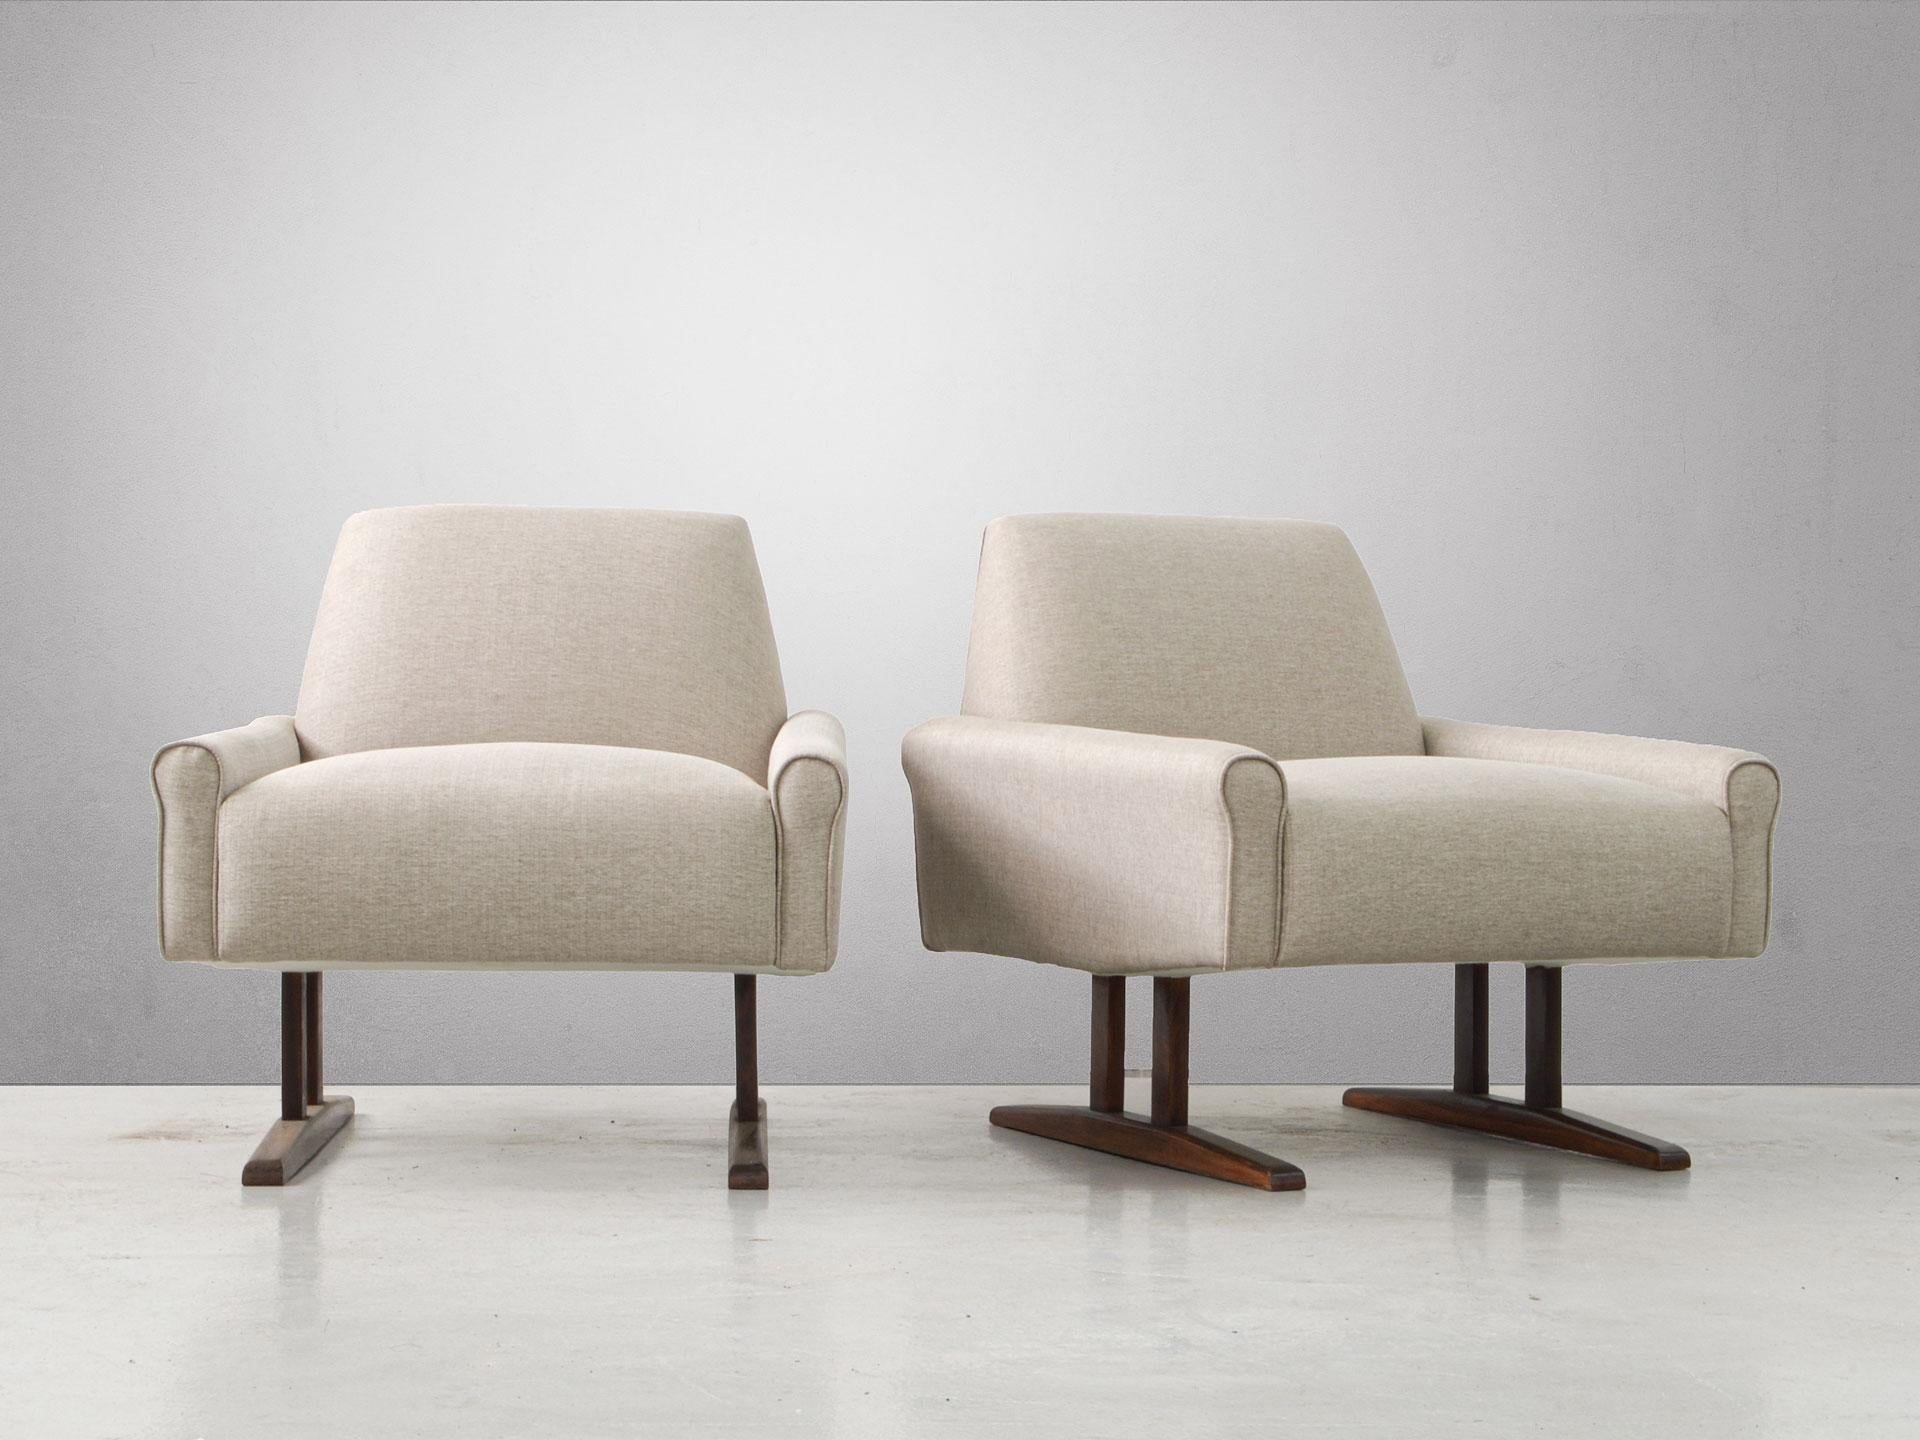 This beautiful pair of armchairs designed by L'Atelier is a great example of the style of Brazilian midcentury furniture. The materials are disposed of in such a way as to create a sense of balance and elegance. The Brazilian Hardwood details from